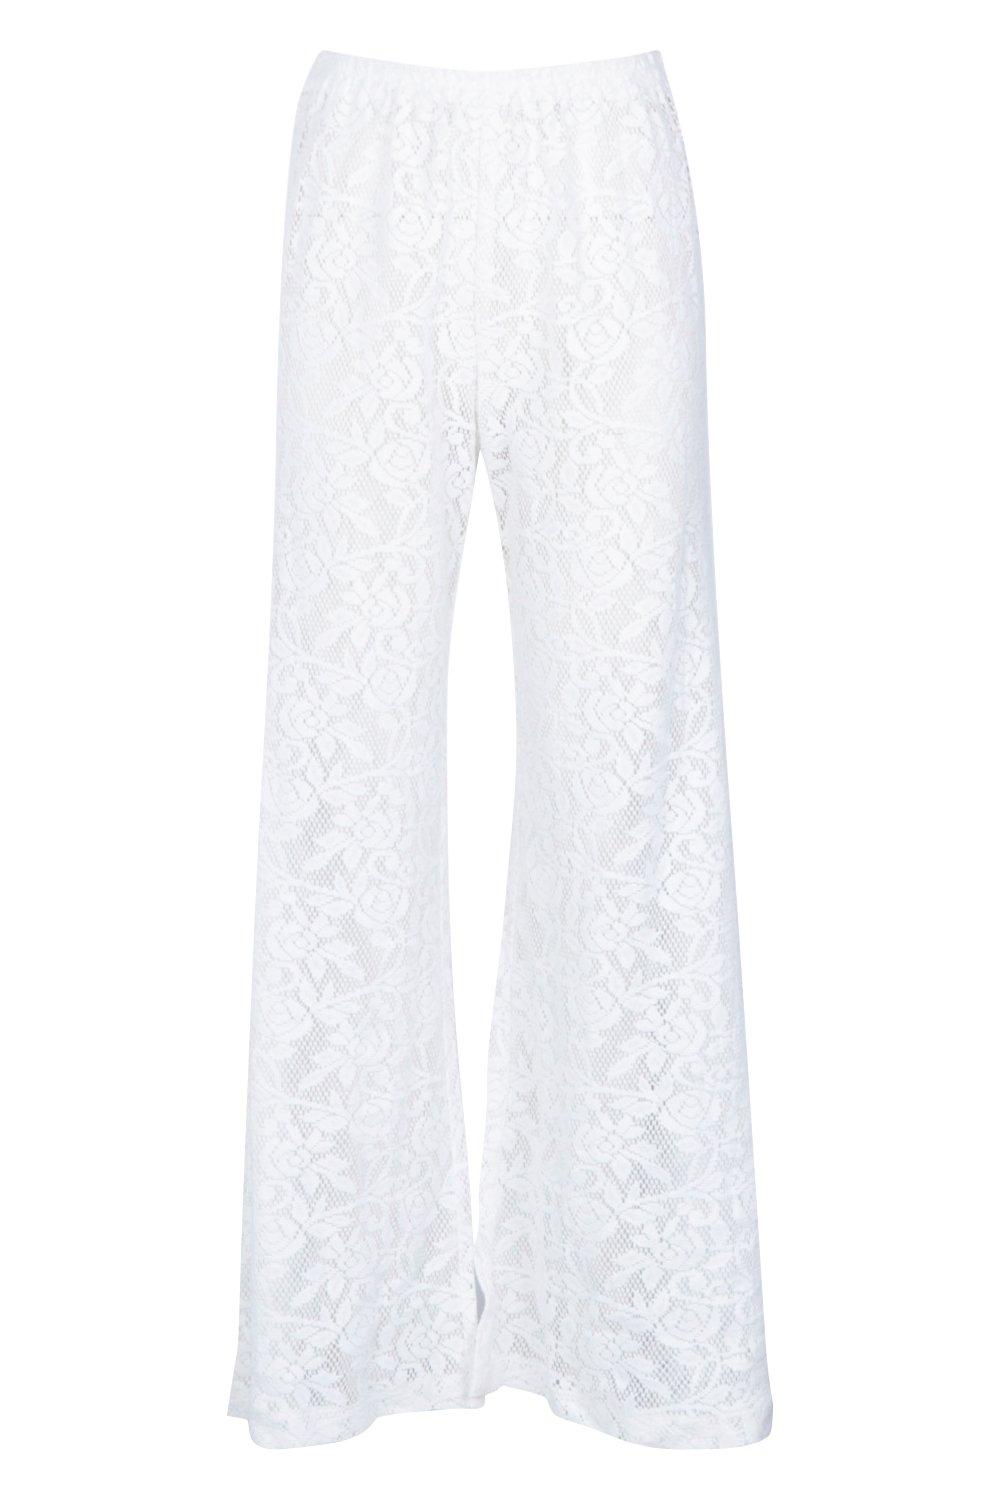 white lace beach trousers